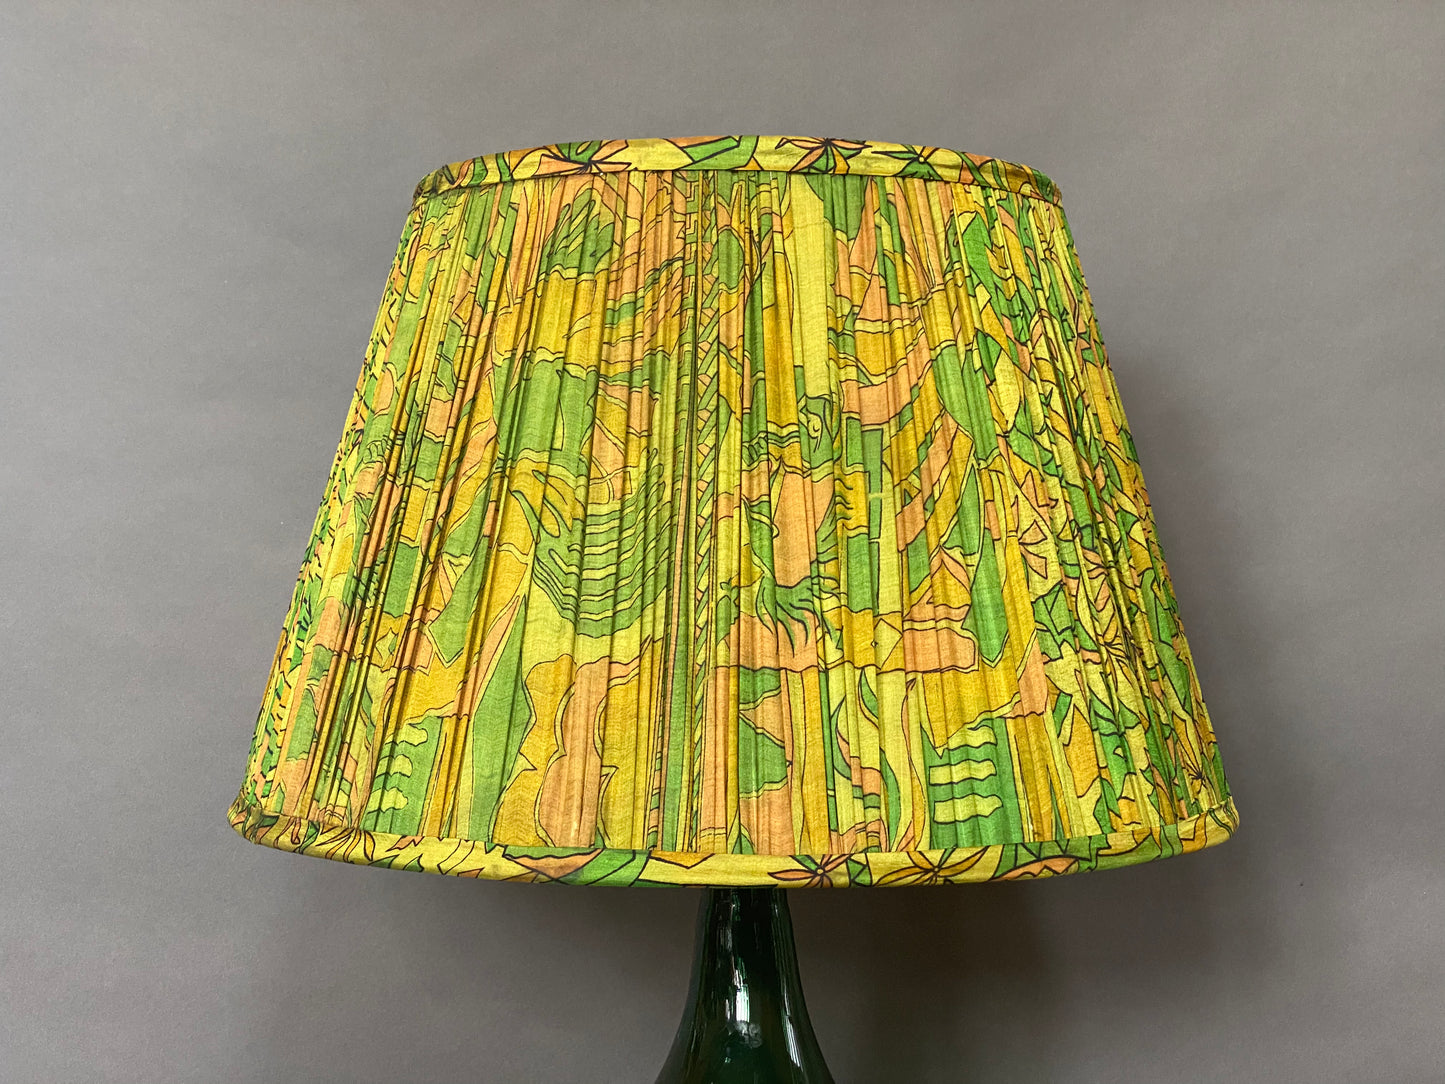 Green & citrine silk lampshade on a grey background